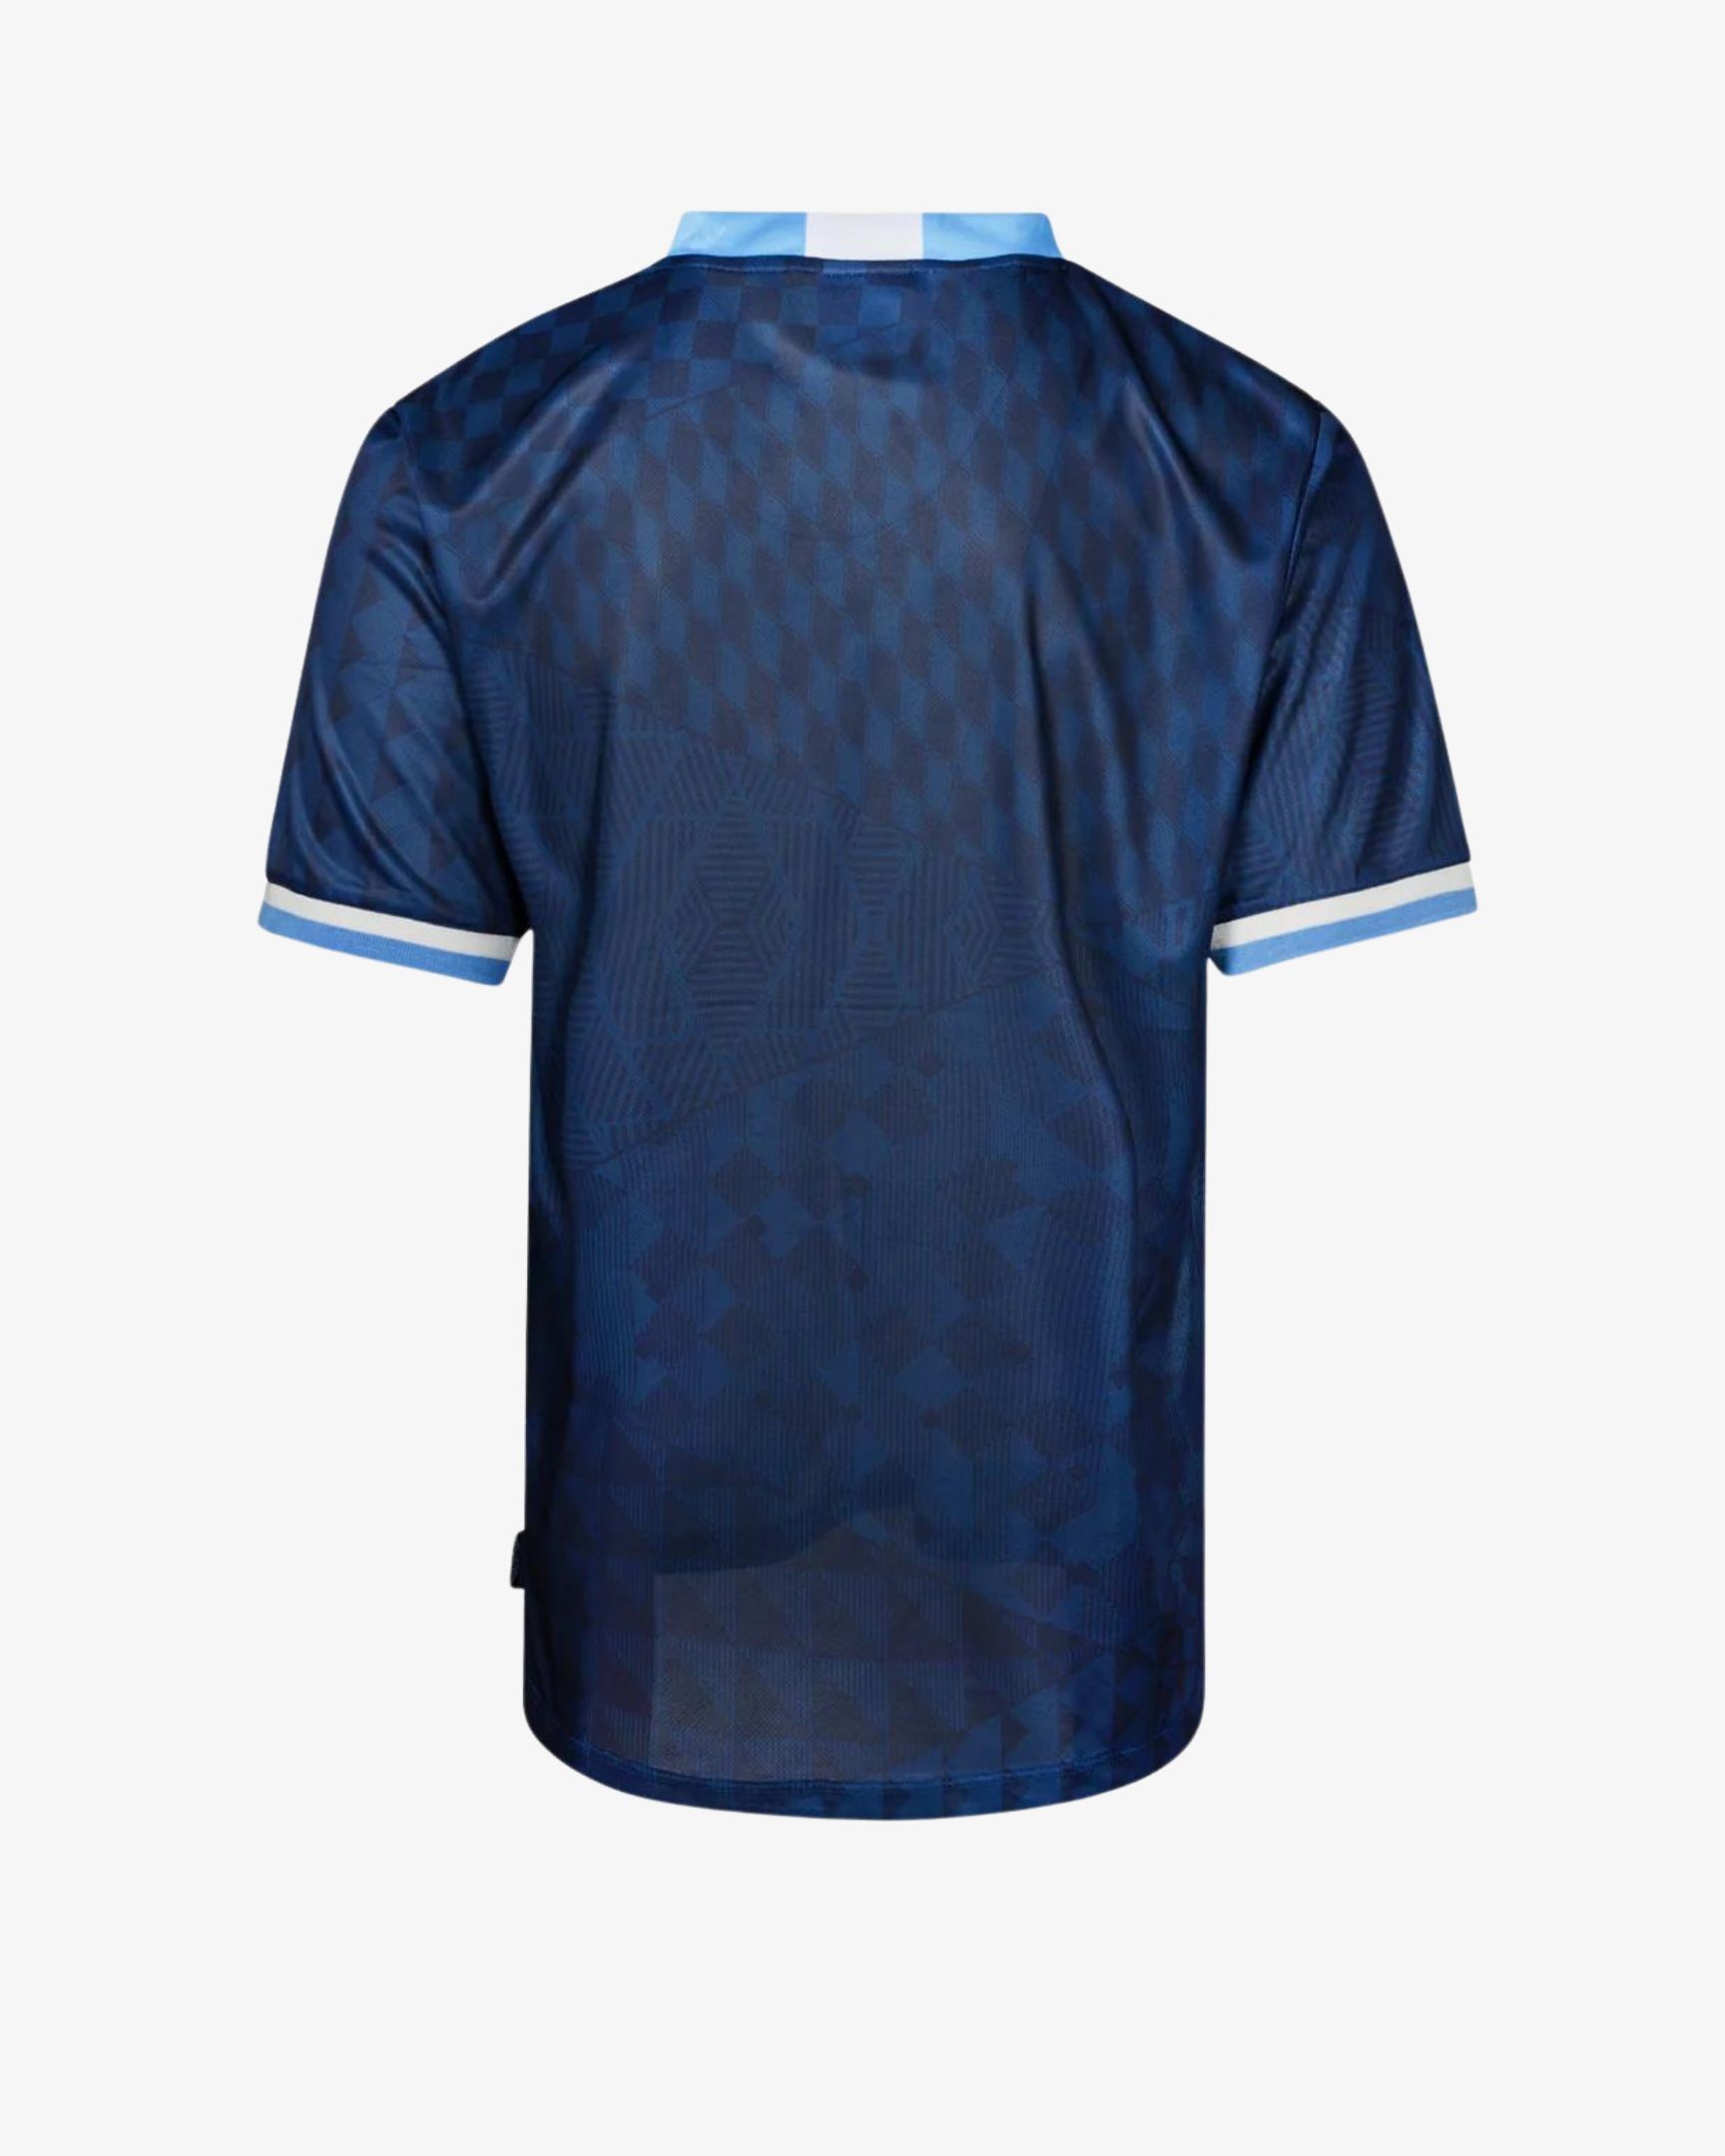 ARGENTINA ICONIC GRAPHIC JERSEY